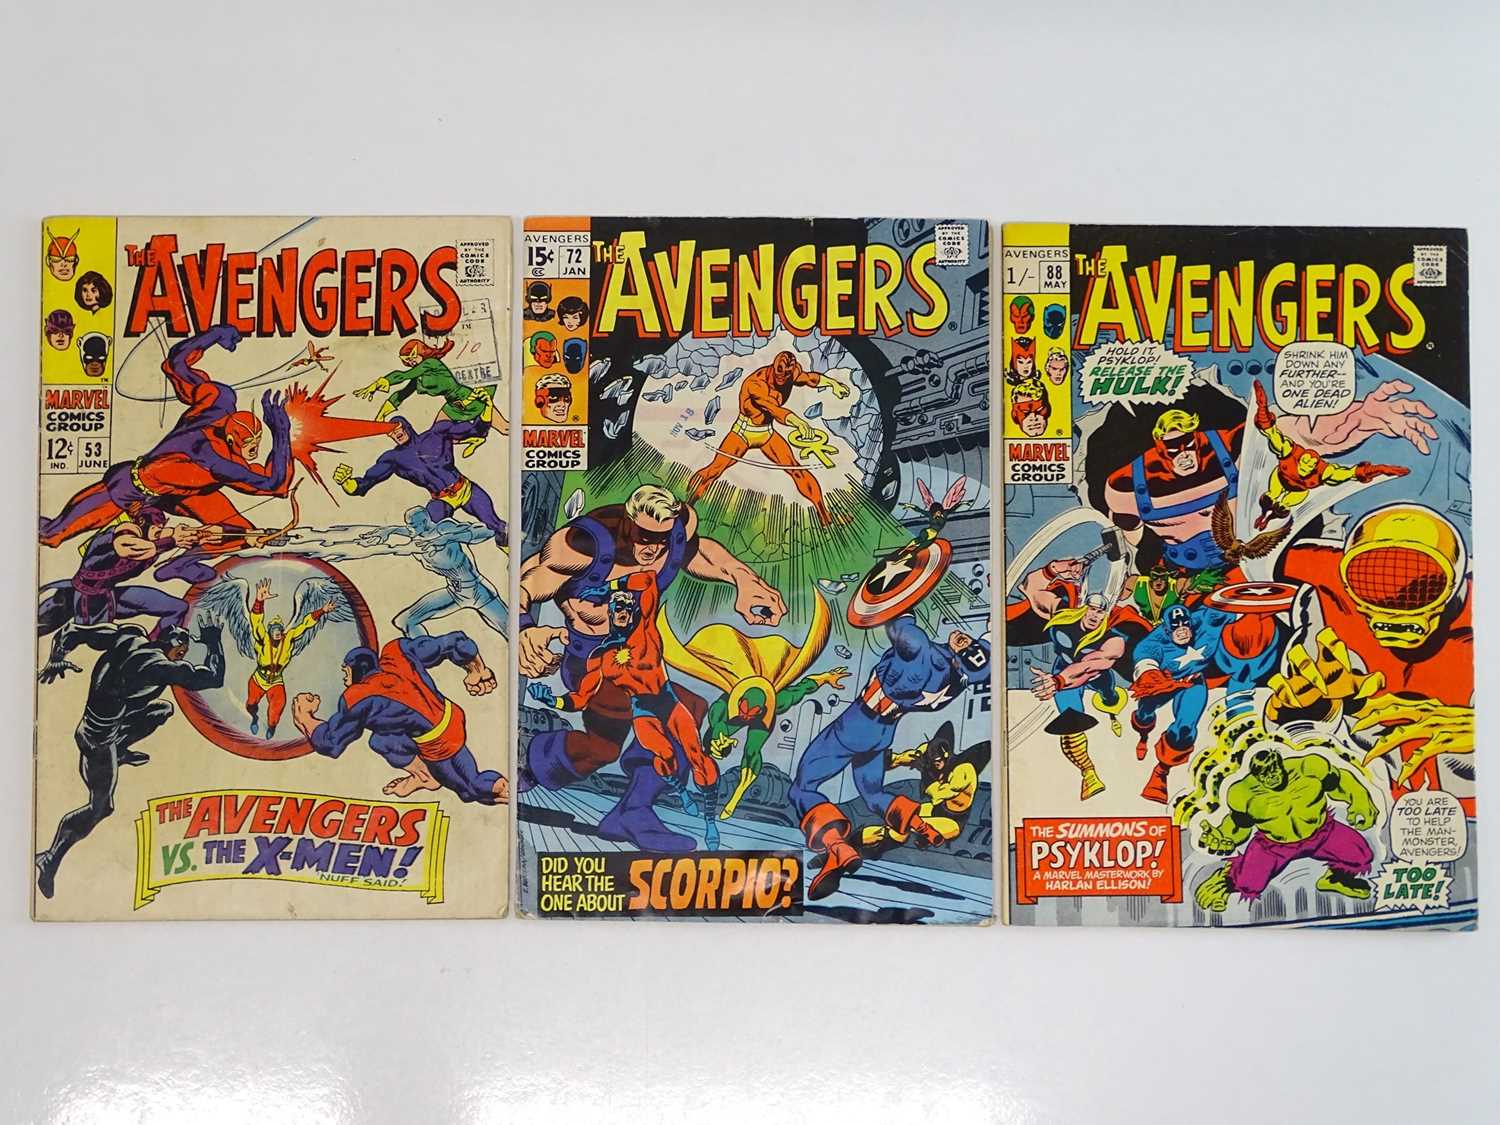 AVENGERS #53, 72, 88 - (3 in Lot) - (1968/71 - MARVEL - US Price & UK Price Variant) - Includes X-